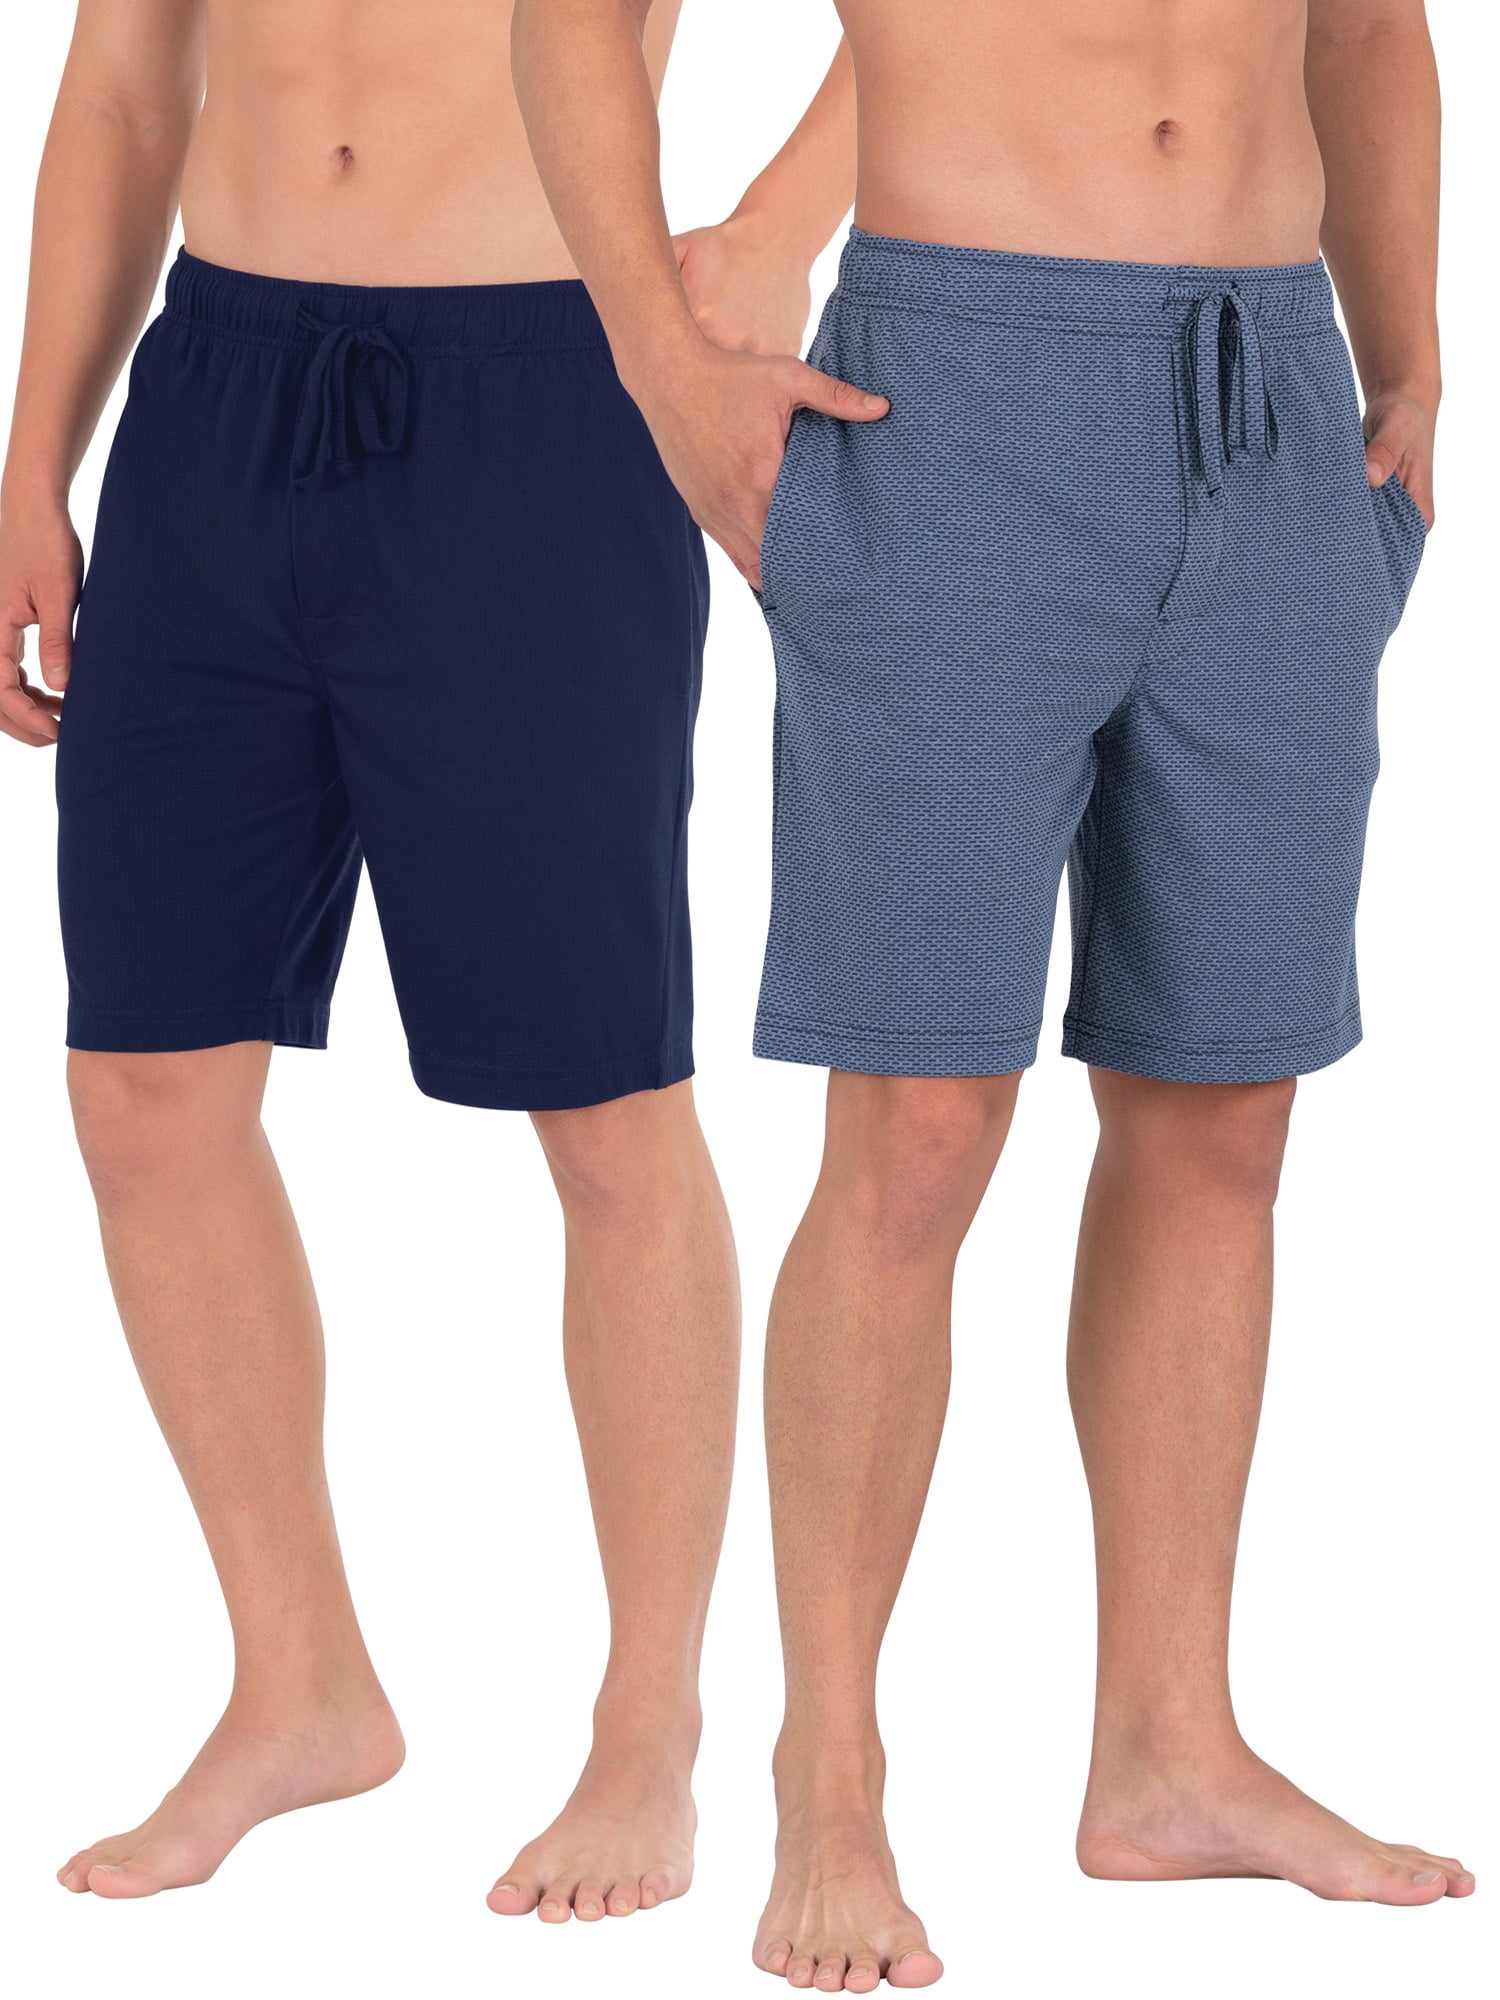 Fruit of the Loom Mens Cotton Shorts with Side Pockets 3 Pack